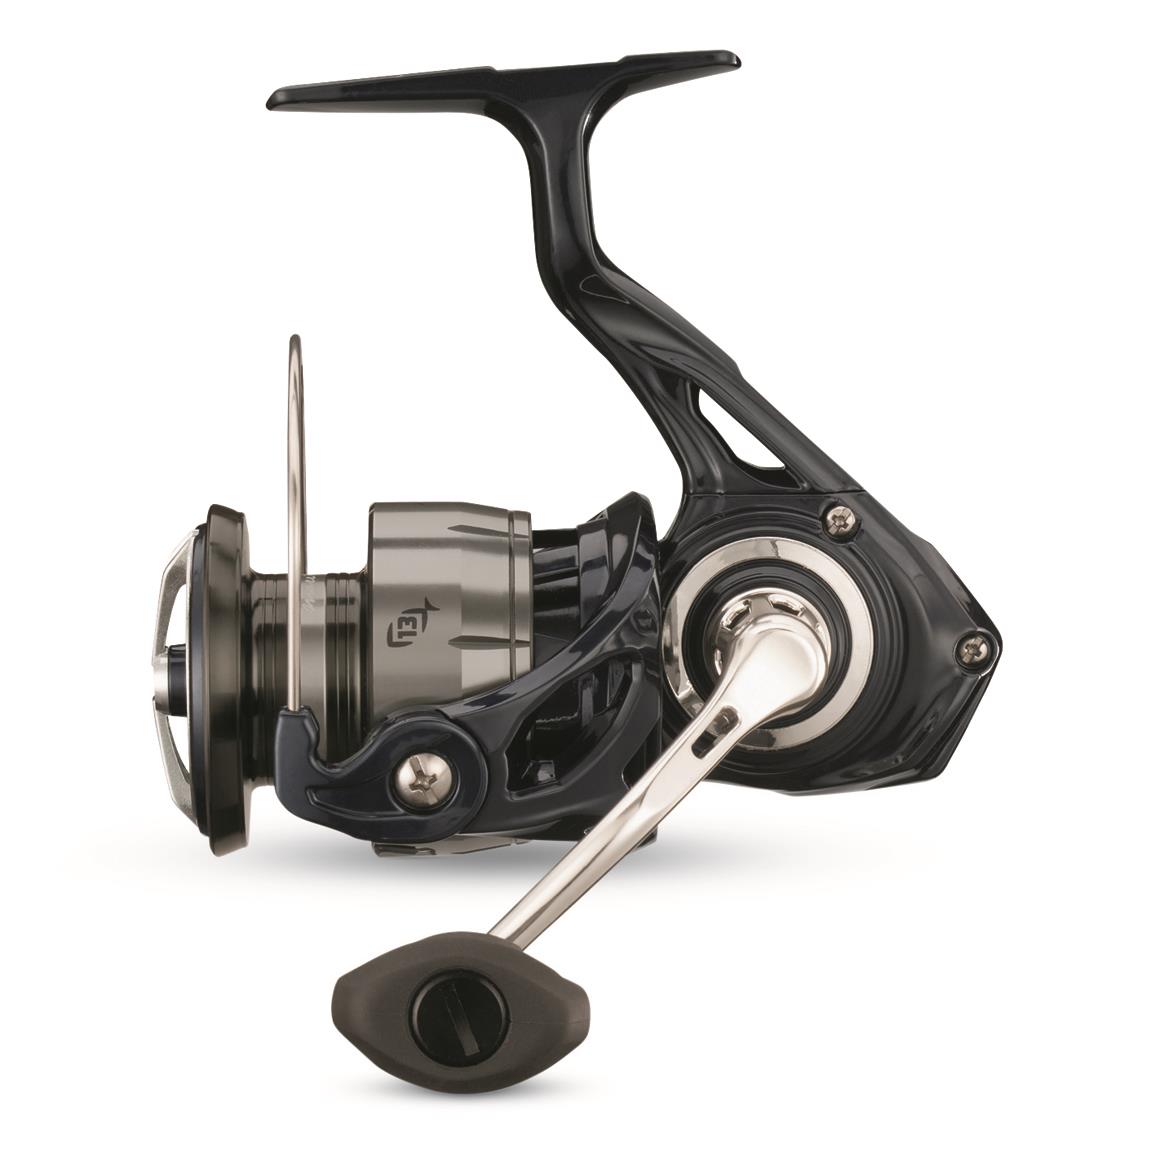 13 Fishing Aerios Spinning Reel, Size 3000, 6.2:1 Gear Ratio